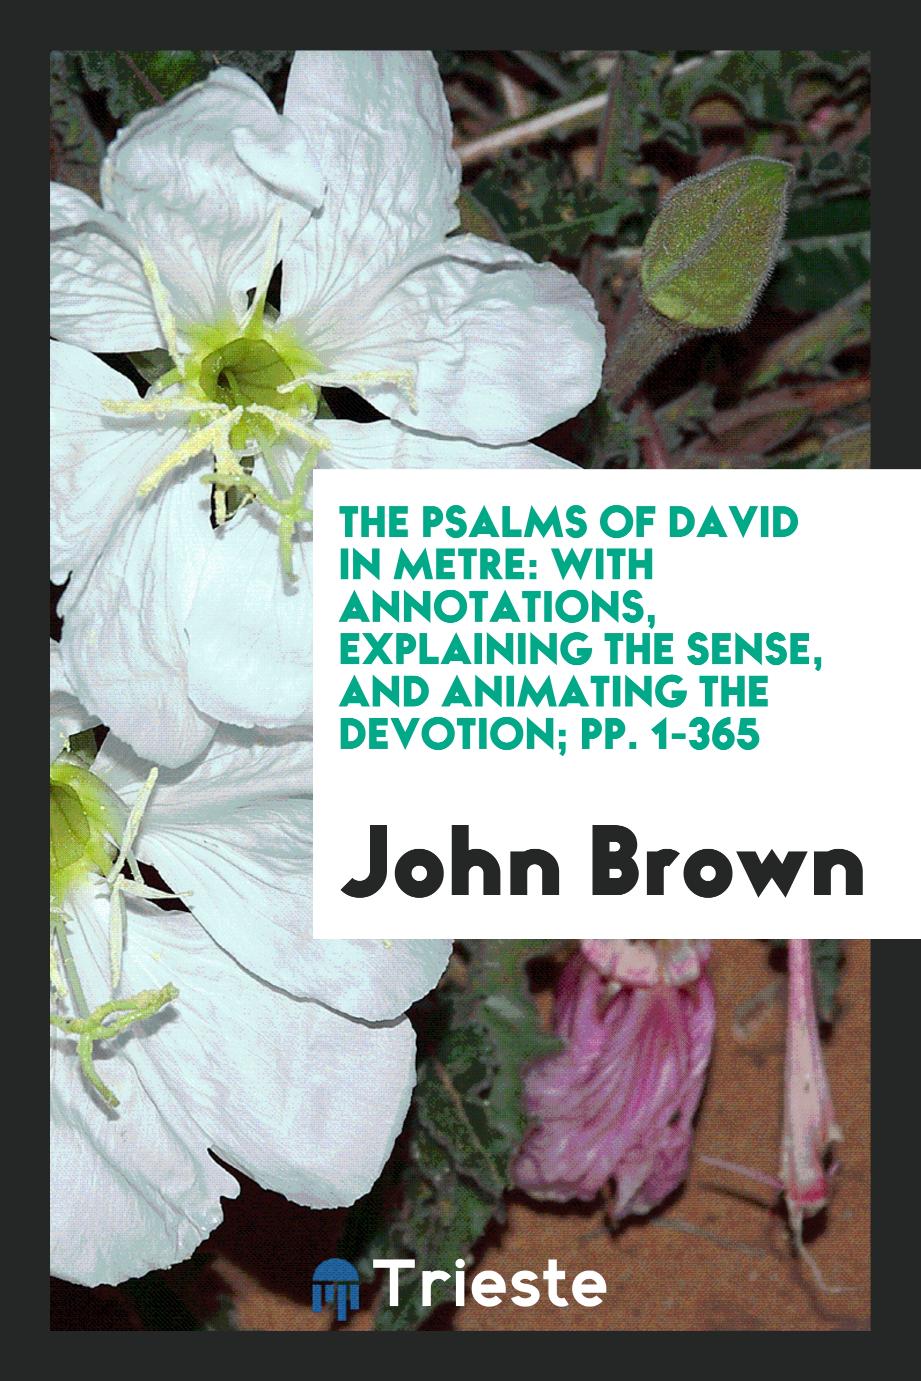 The Psalms of David in Metre: With Annotations, Explaining the Sense, and Animating the Devotion; pp. 1-365